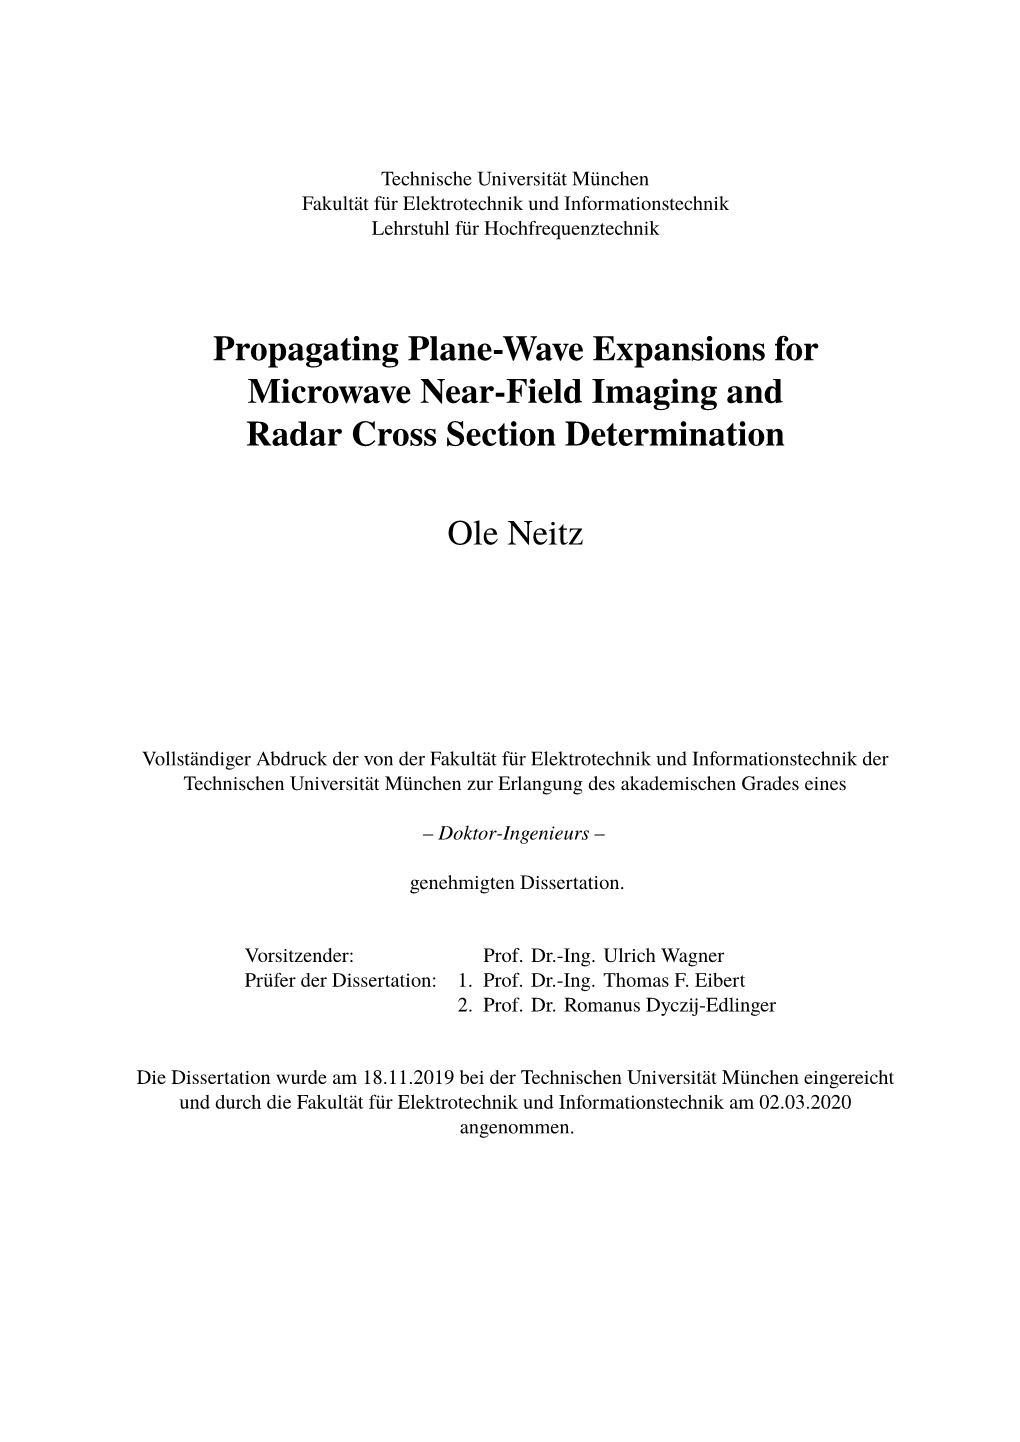 Propagating Plane-Wave Expansions for Microwave Near-Field Imaging and RCS Determination